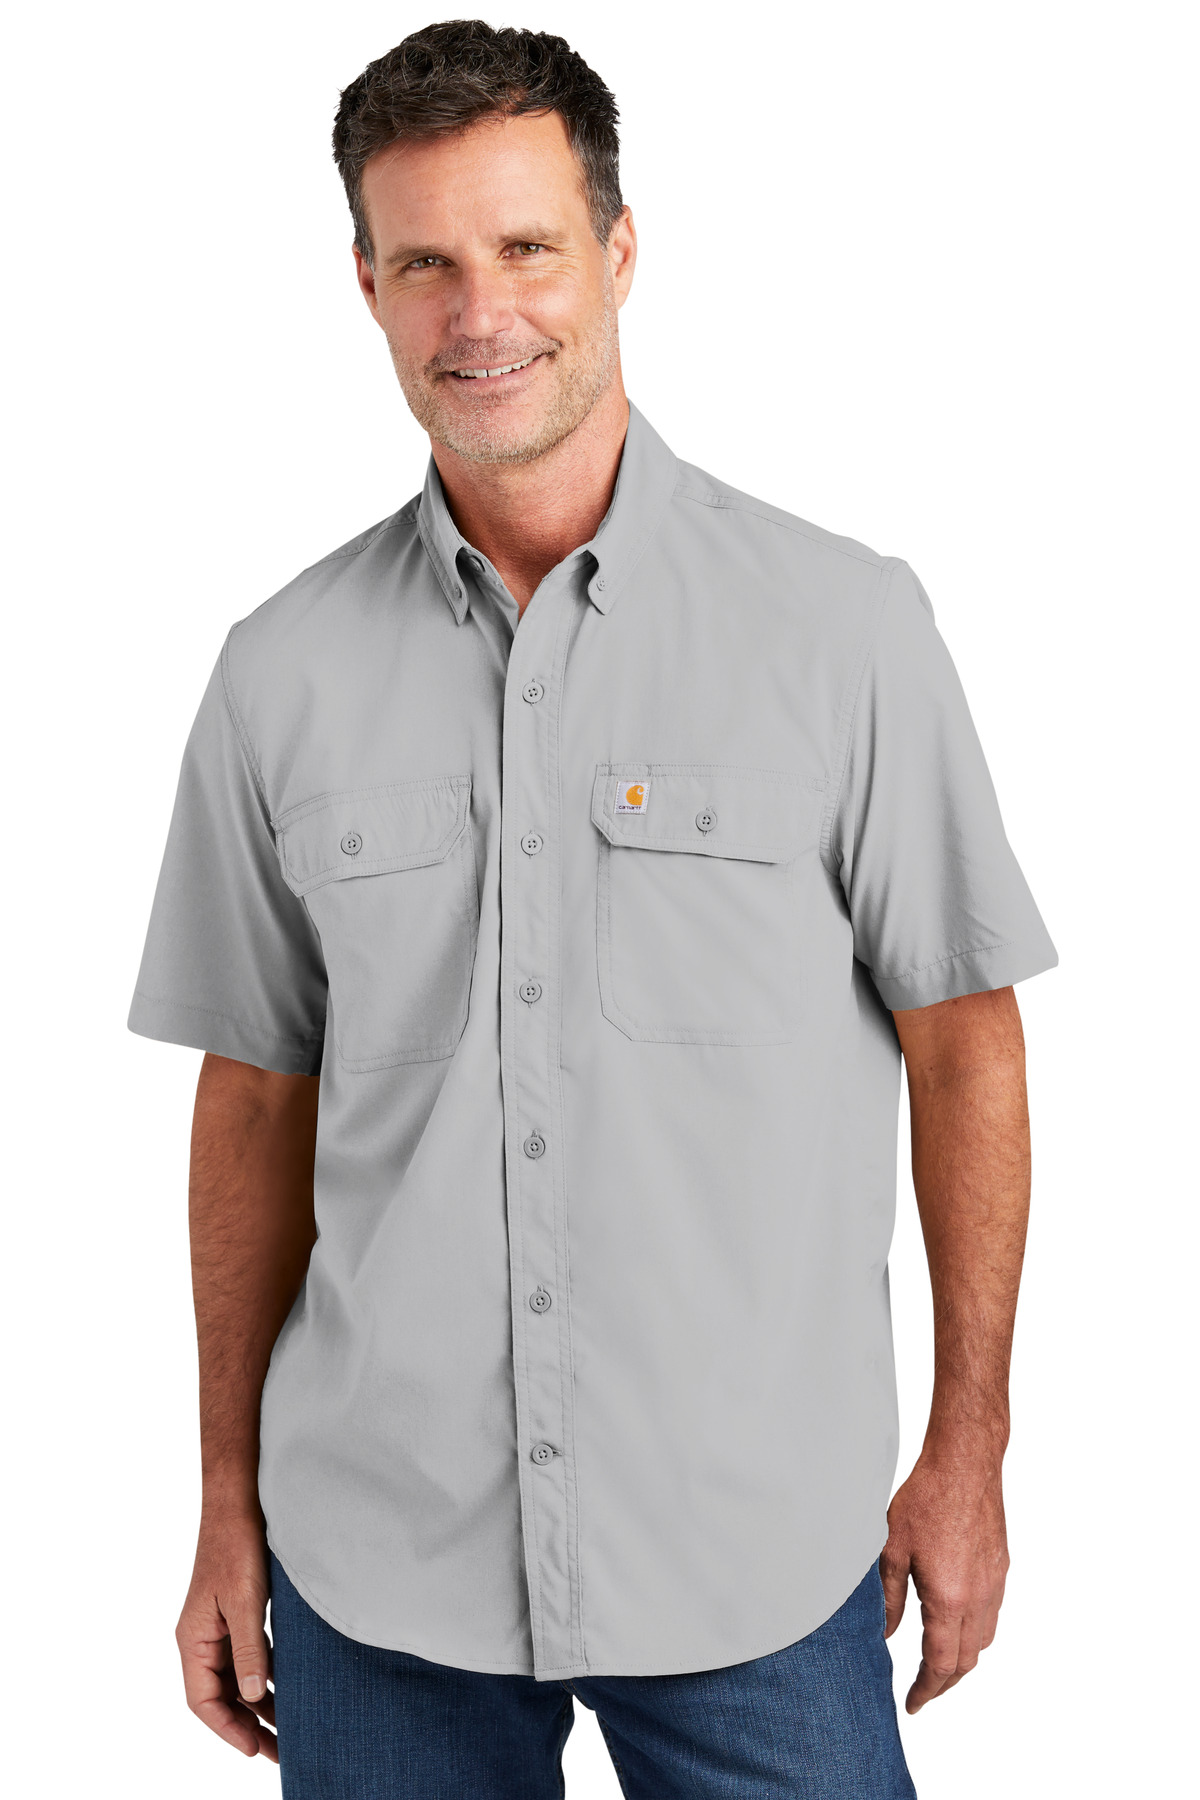 Carhartt Force Solid Short Sleeve Shirt CT105292 | Uniforms Today